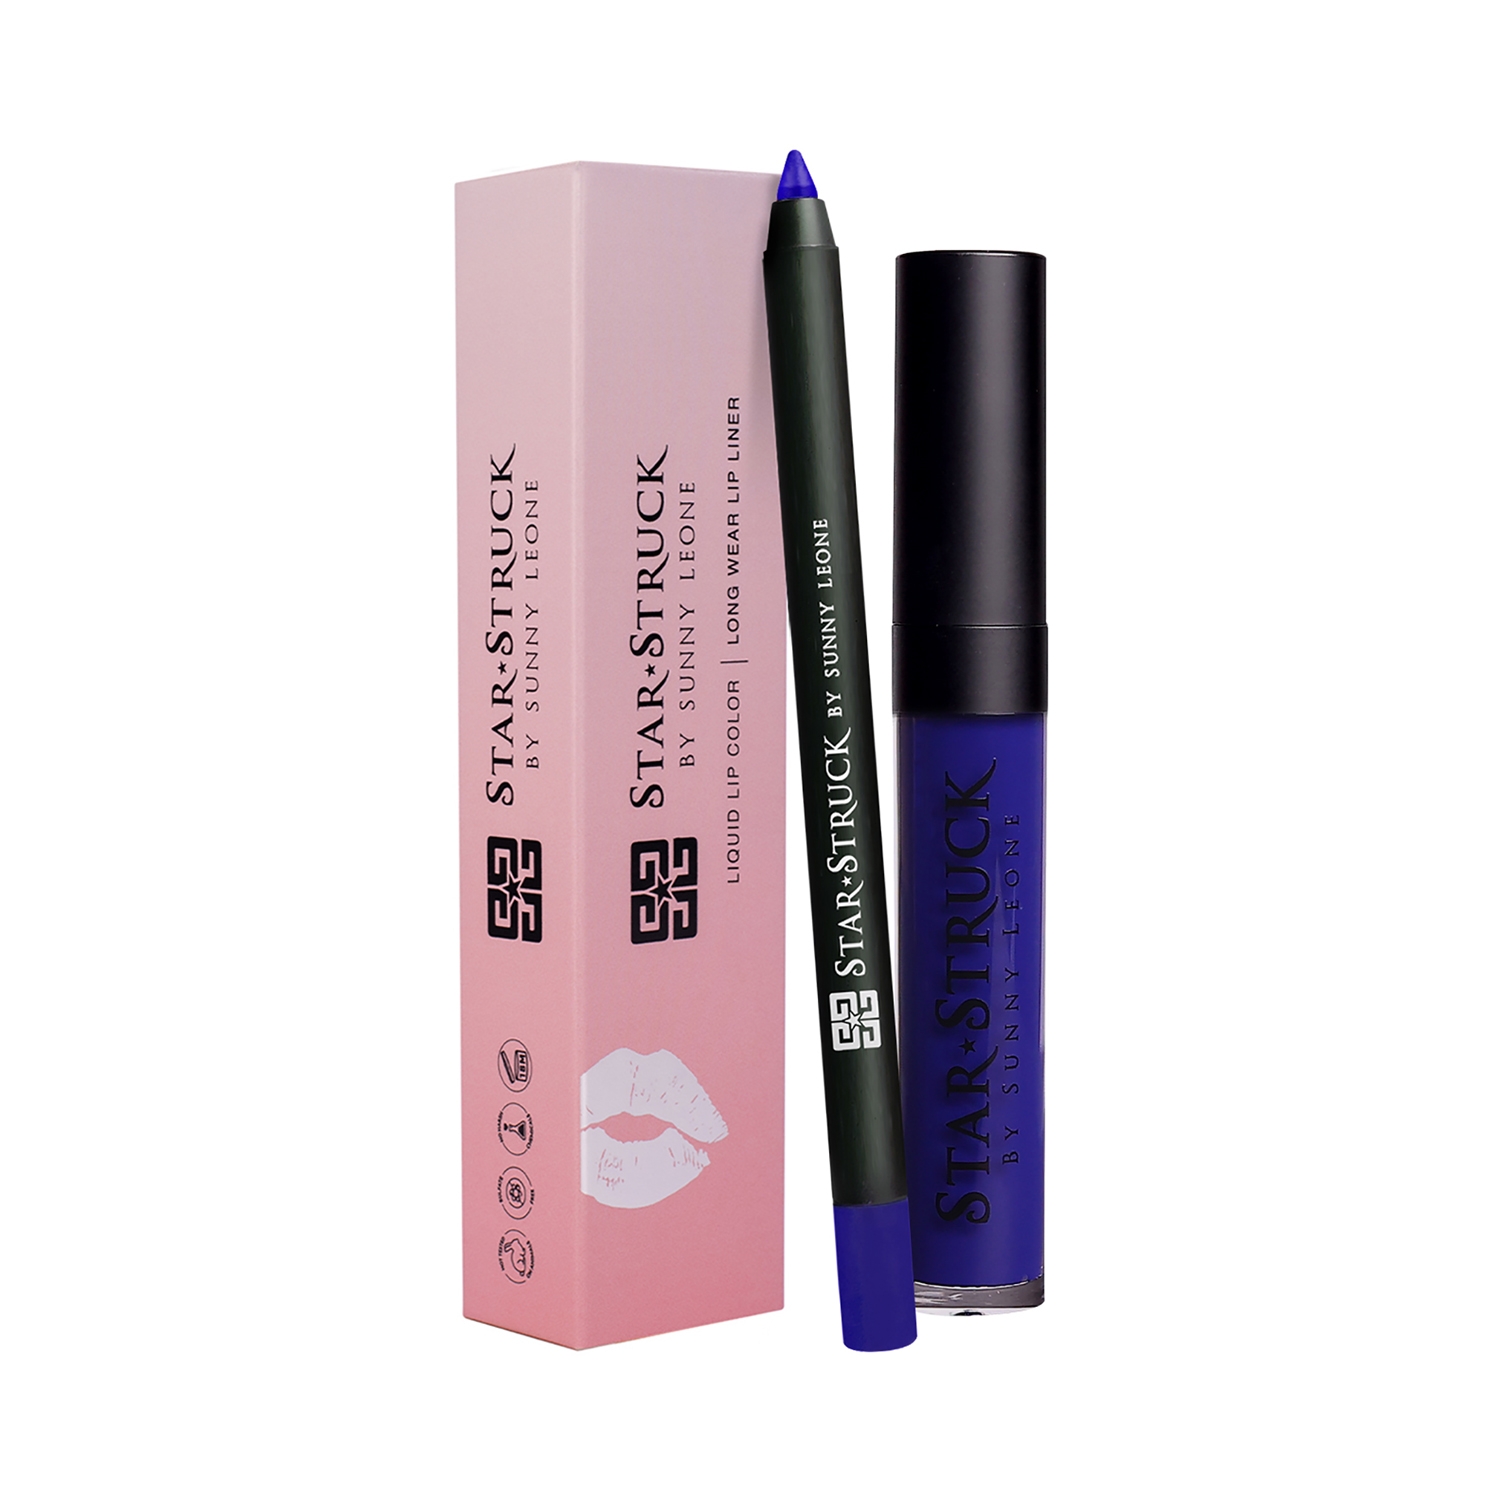 Star Struck by Sunny Leone | Star Struck by Sunny Leone Long Wear Lip Liner And Lip Gloss - Sapphire (2 Pcs)